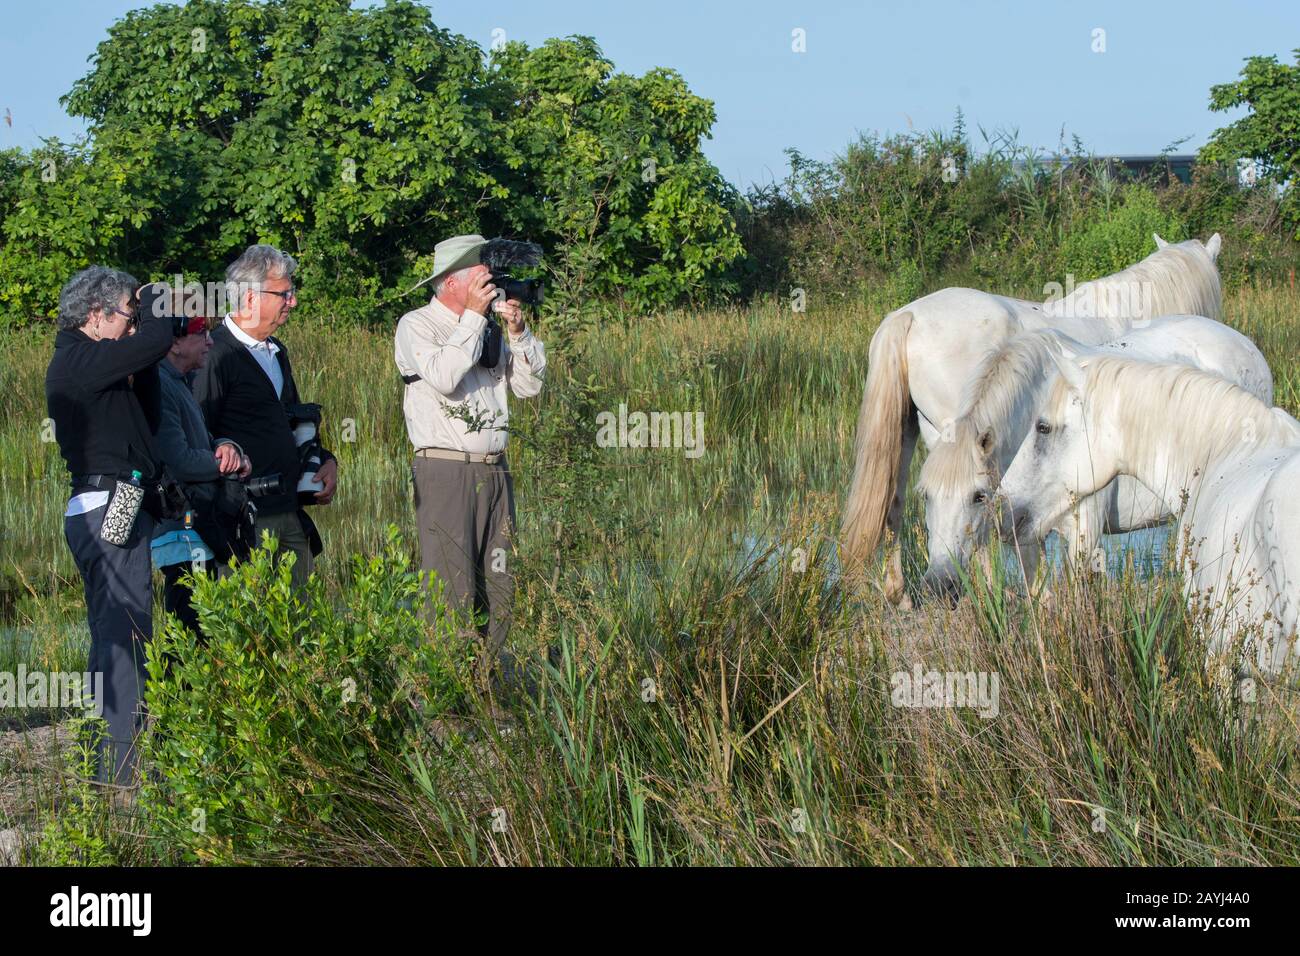 Photo tour members photographing Camargue horses in the Camargue in southern France. Stock Photo